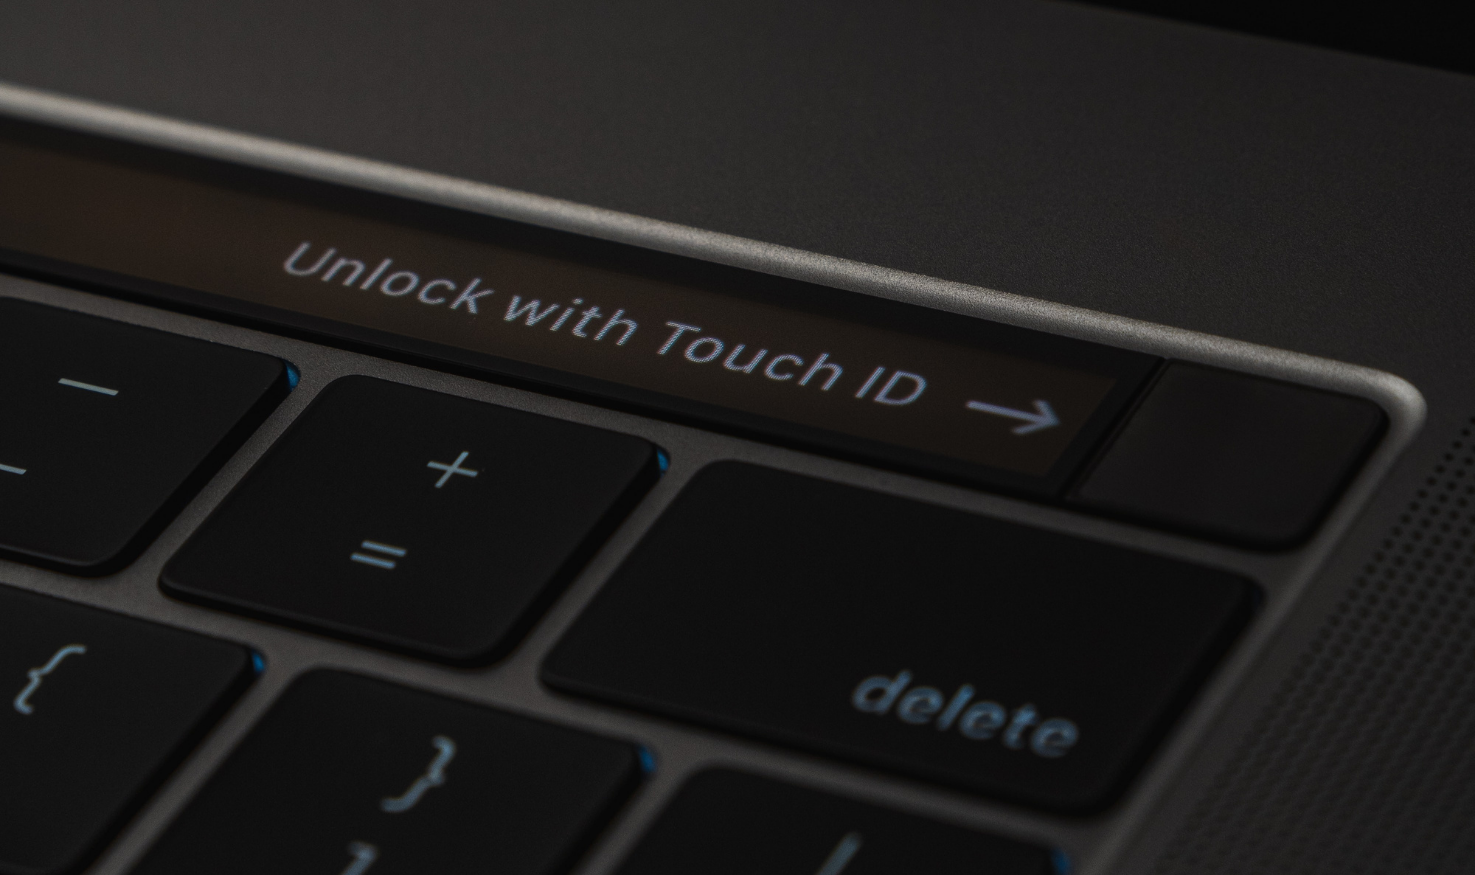 Touch ID on a Mac